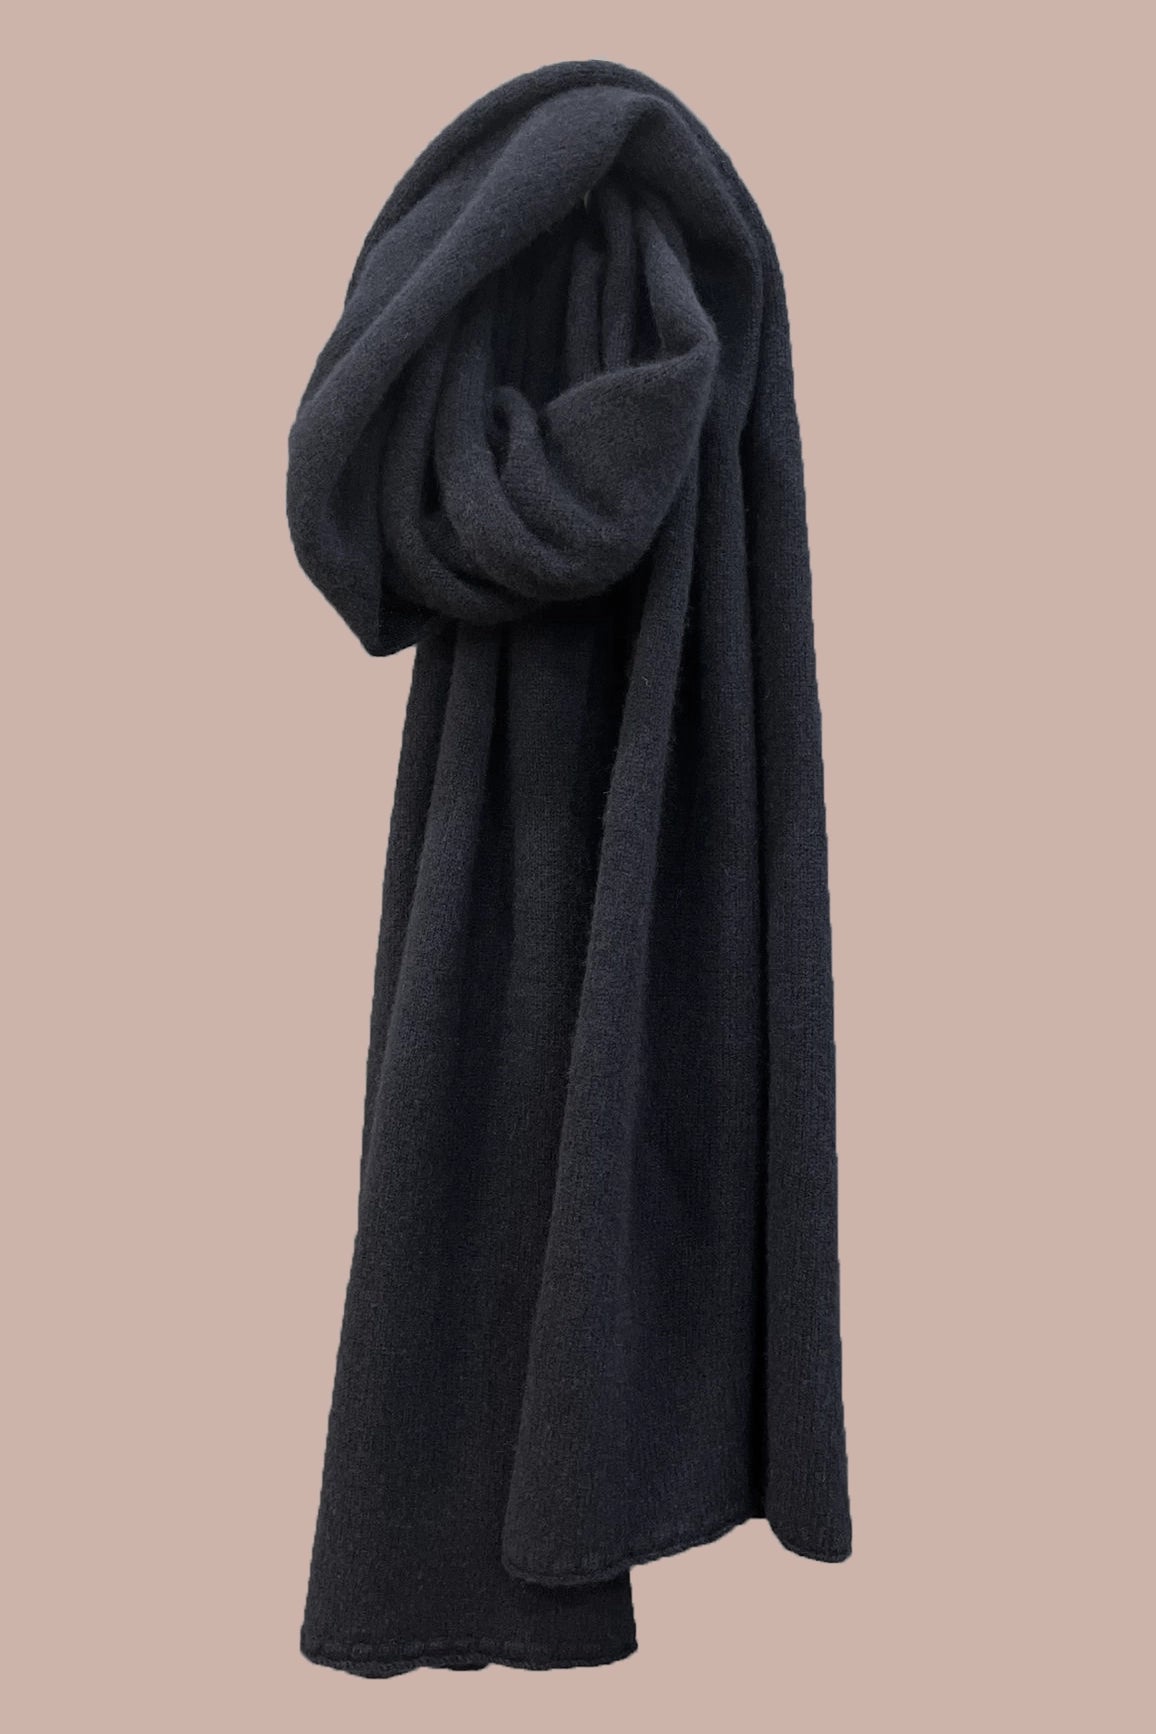 Large Cashmere Wrap in Navy Blue Grey